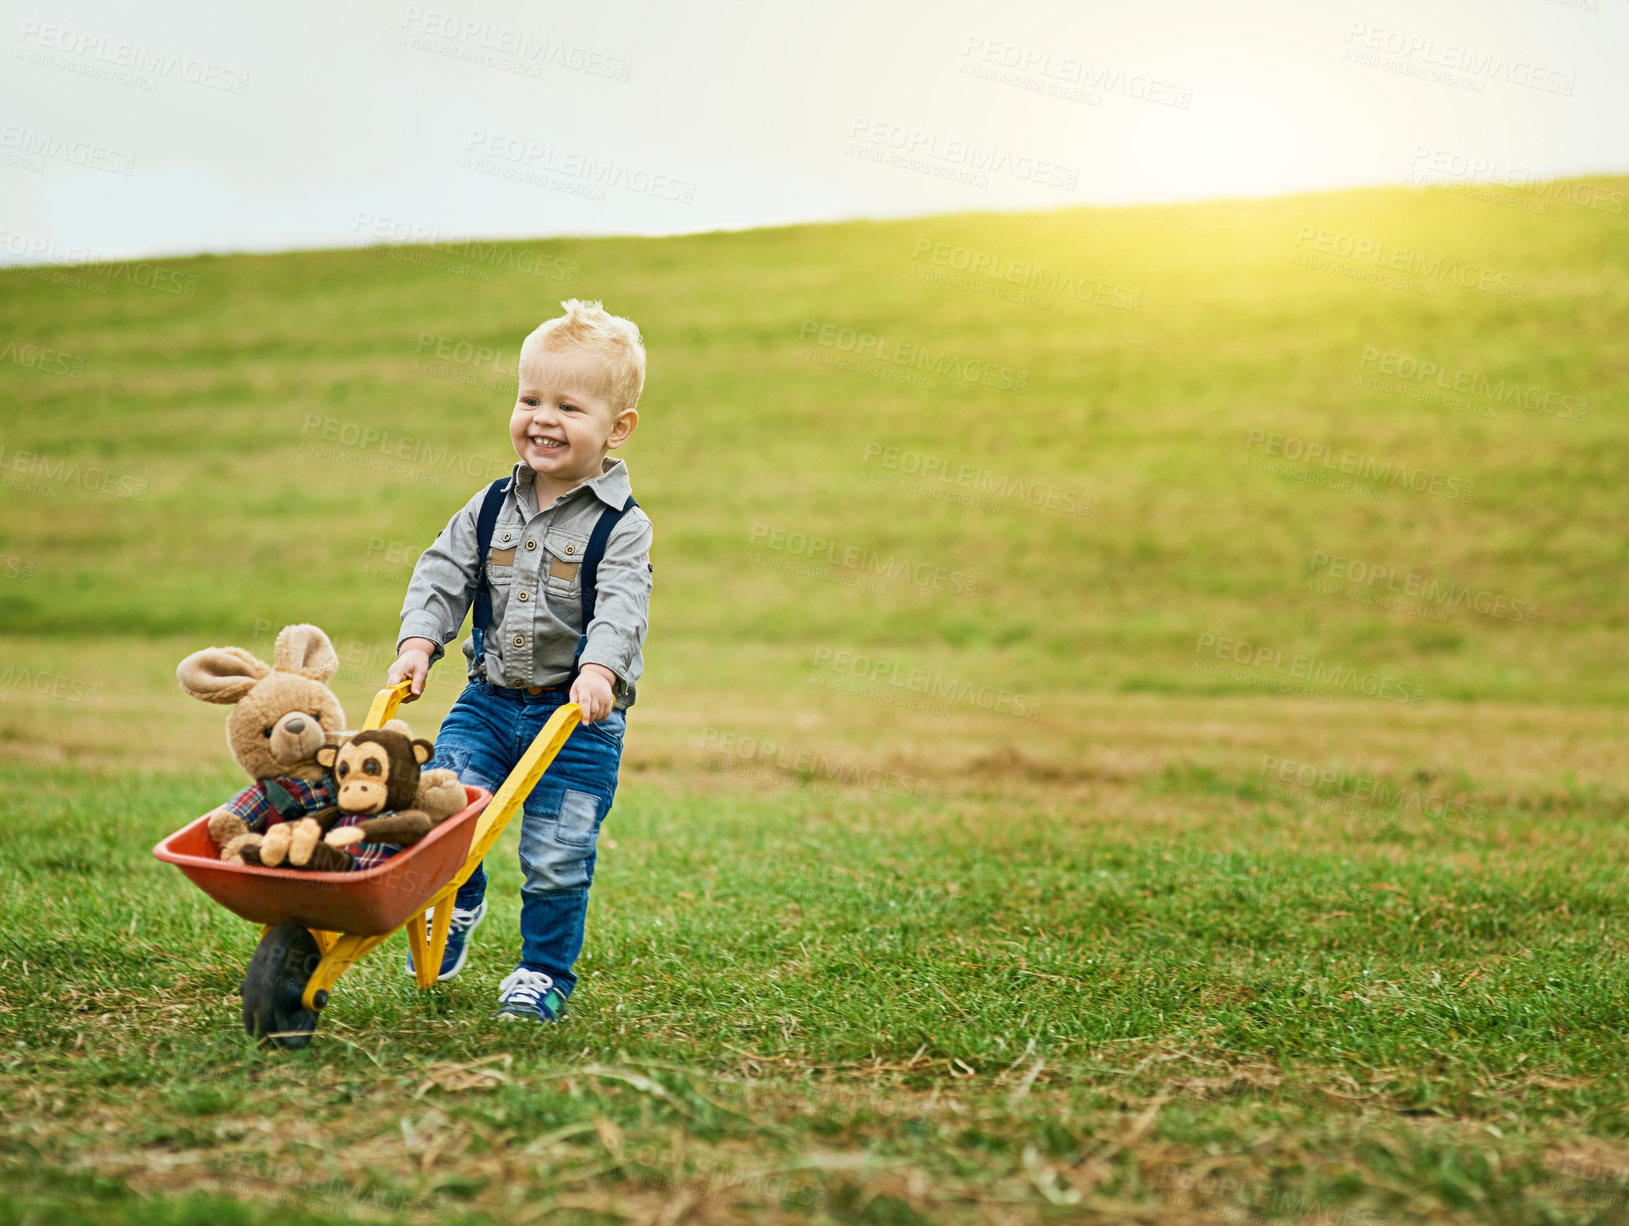 Buy stock photo Shot of an adorable little boy pushing a toy wheelbarrow filled with stuffed animals on a farm